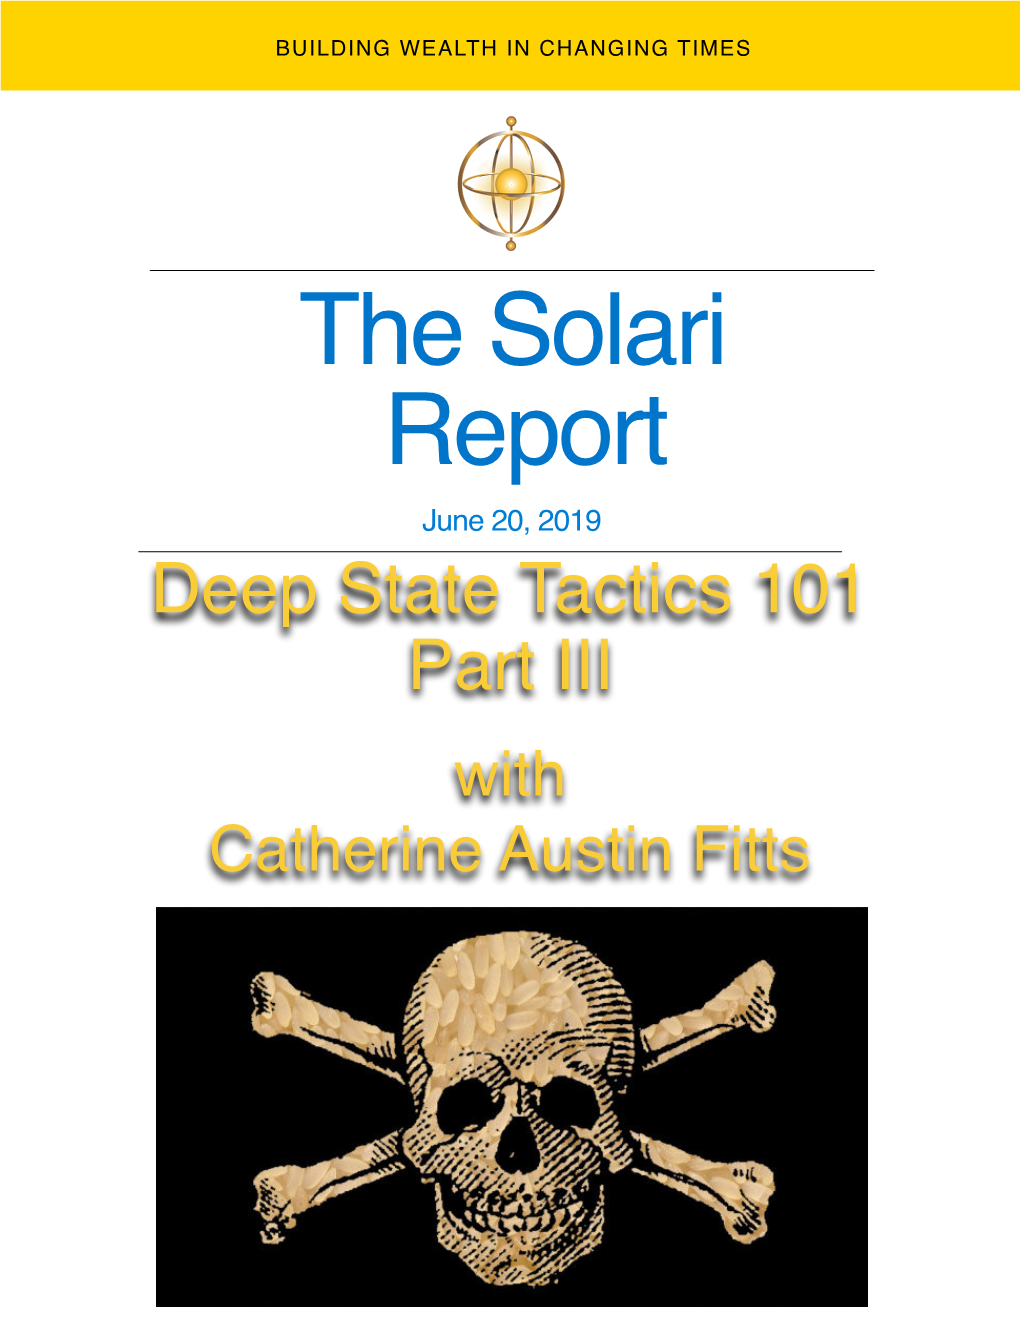 C. Austin Fitts: Welcome to the Solari Report